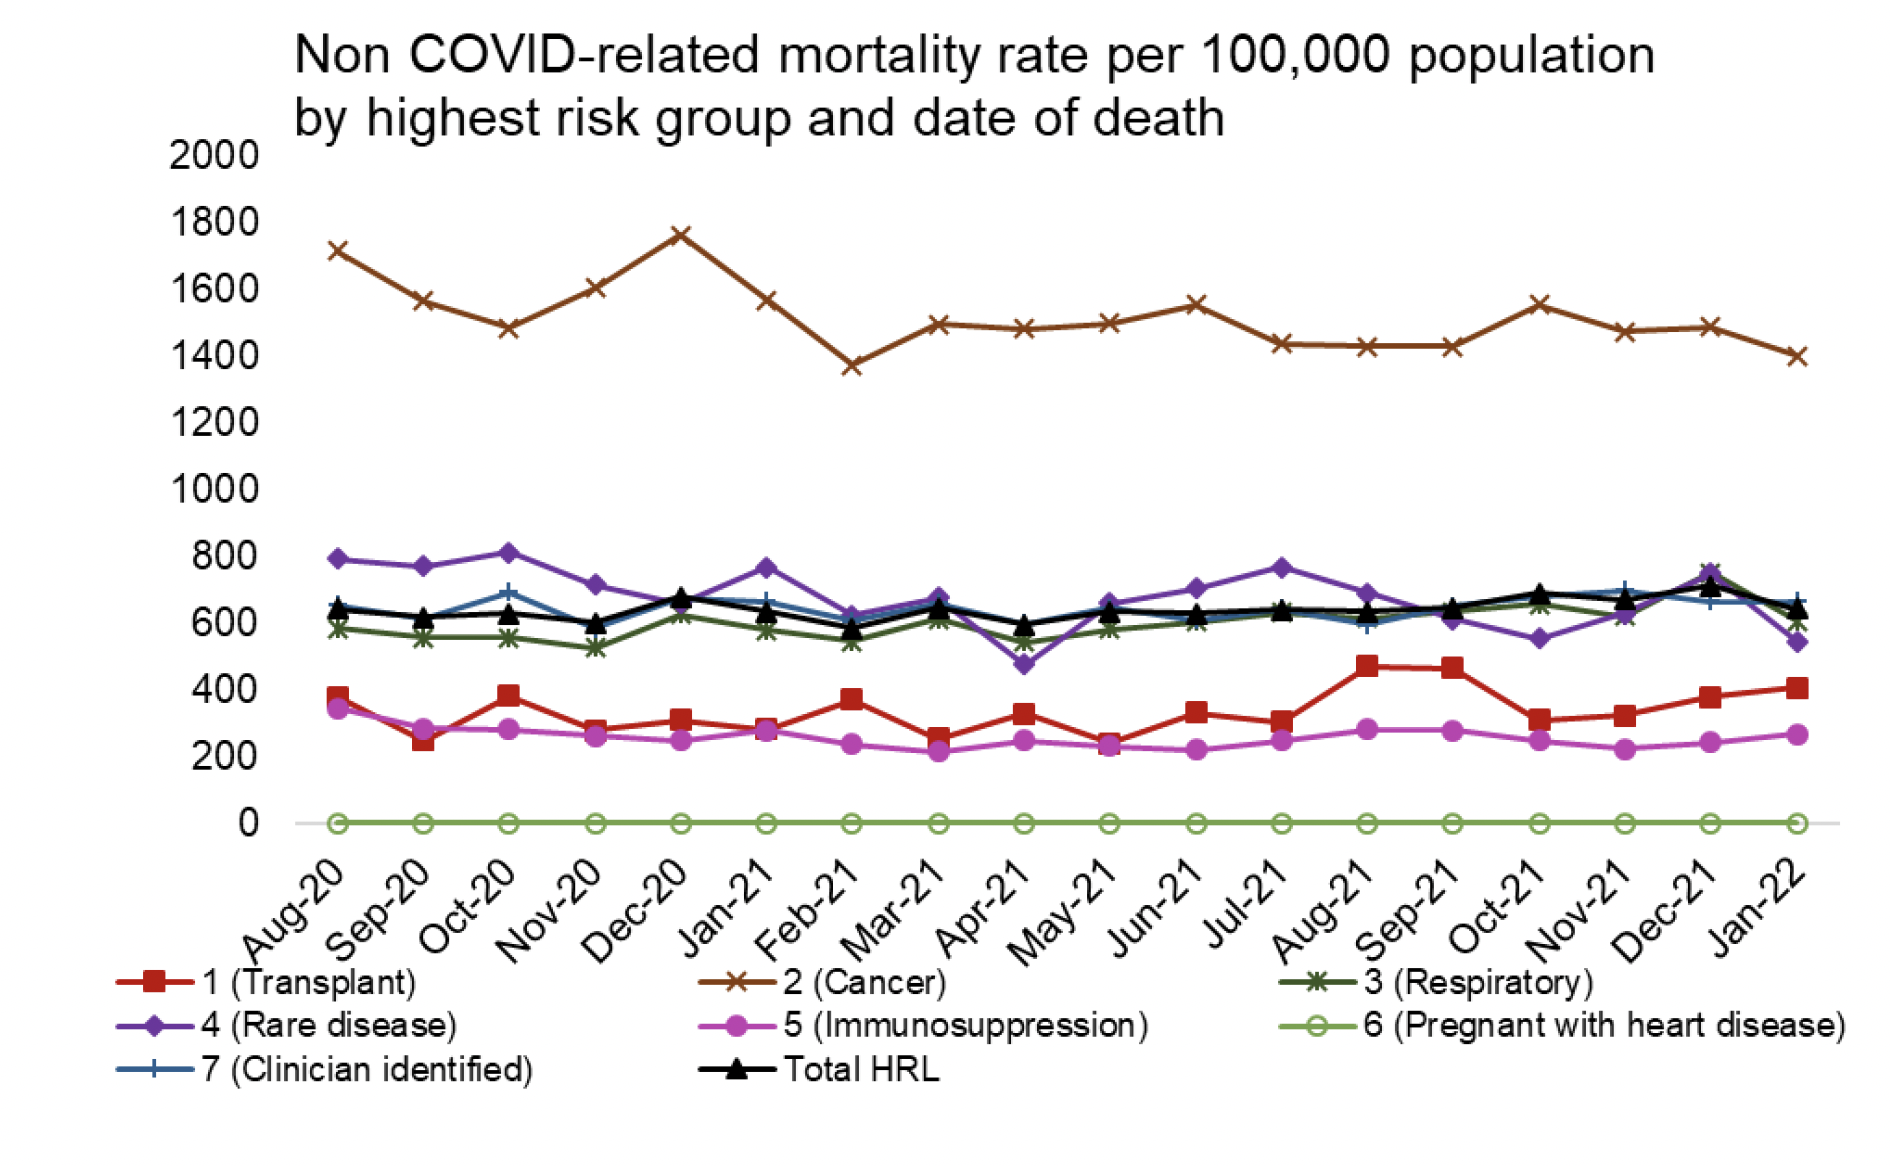 
Figure 9 shows the COVID-related mortality in the highest risk groups as a multiple of the COVID-related mortality in the non-highest risk population by date of death. The Highest Risk List as a whole had a COVID-19 mortality rate 9 times higher than the non-Highest Risk List population in January 2022.
